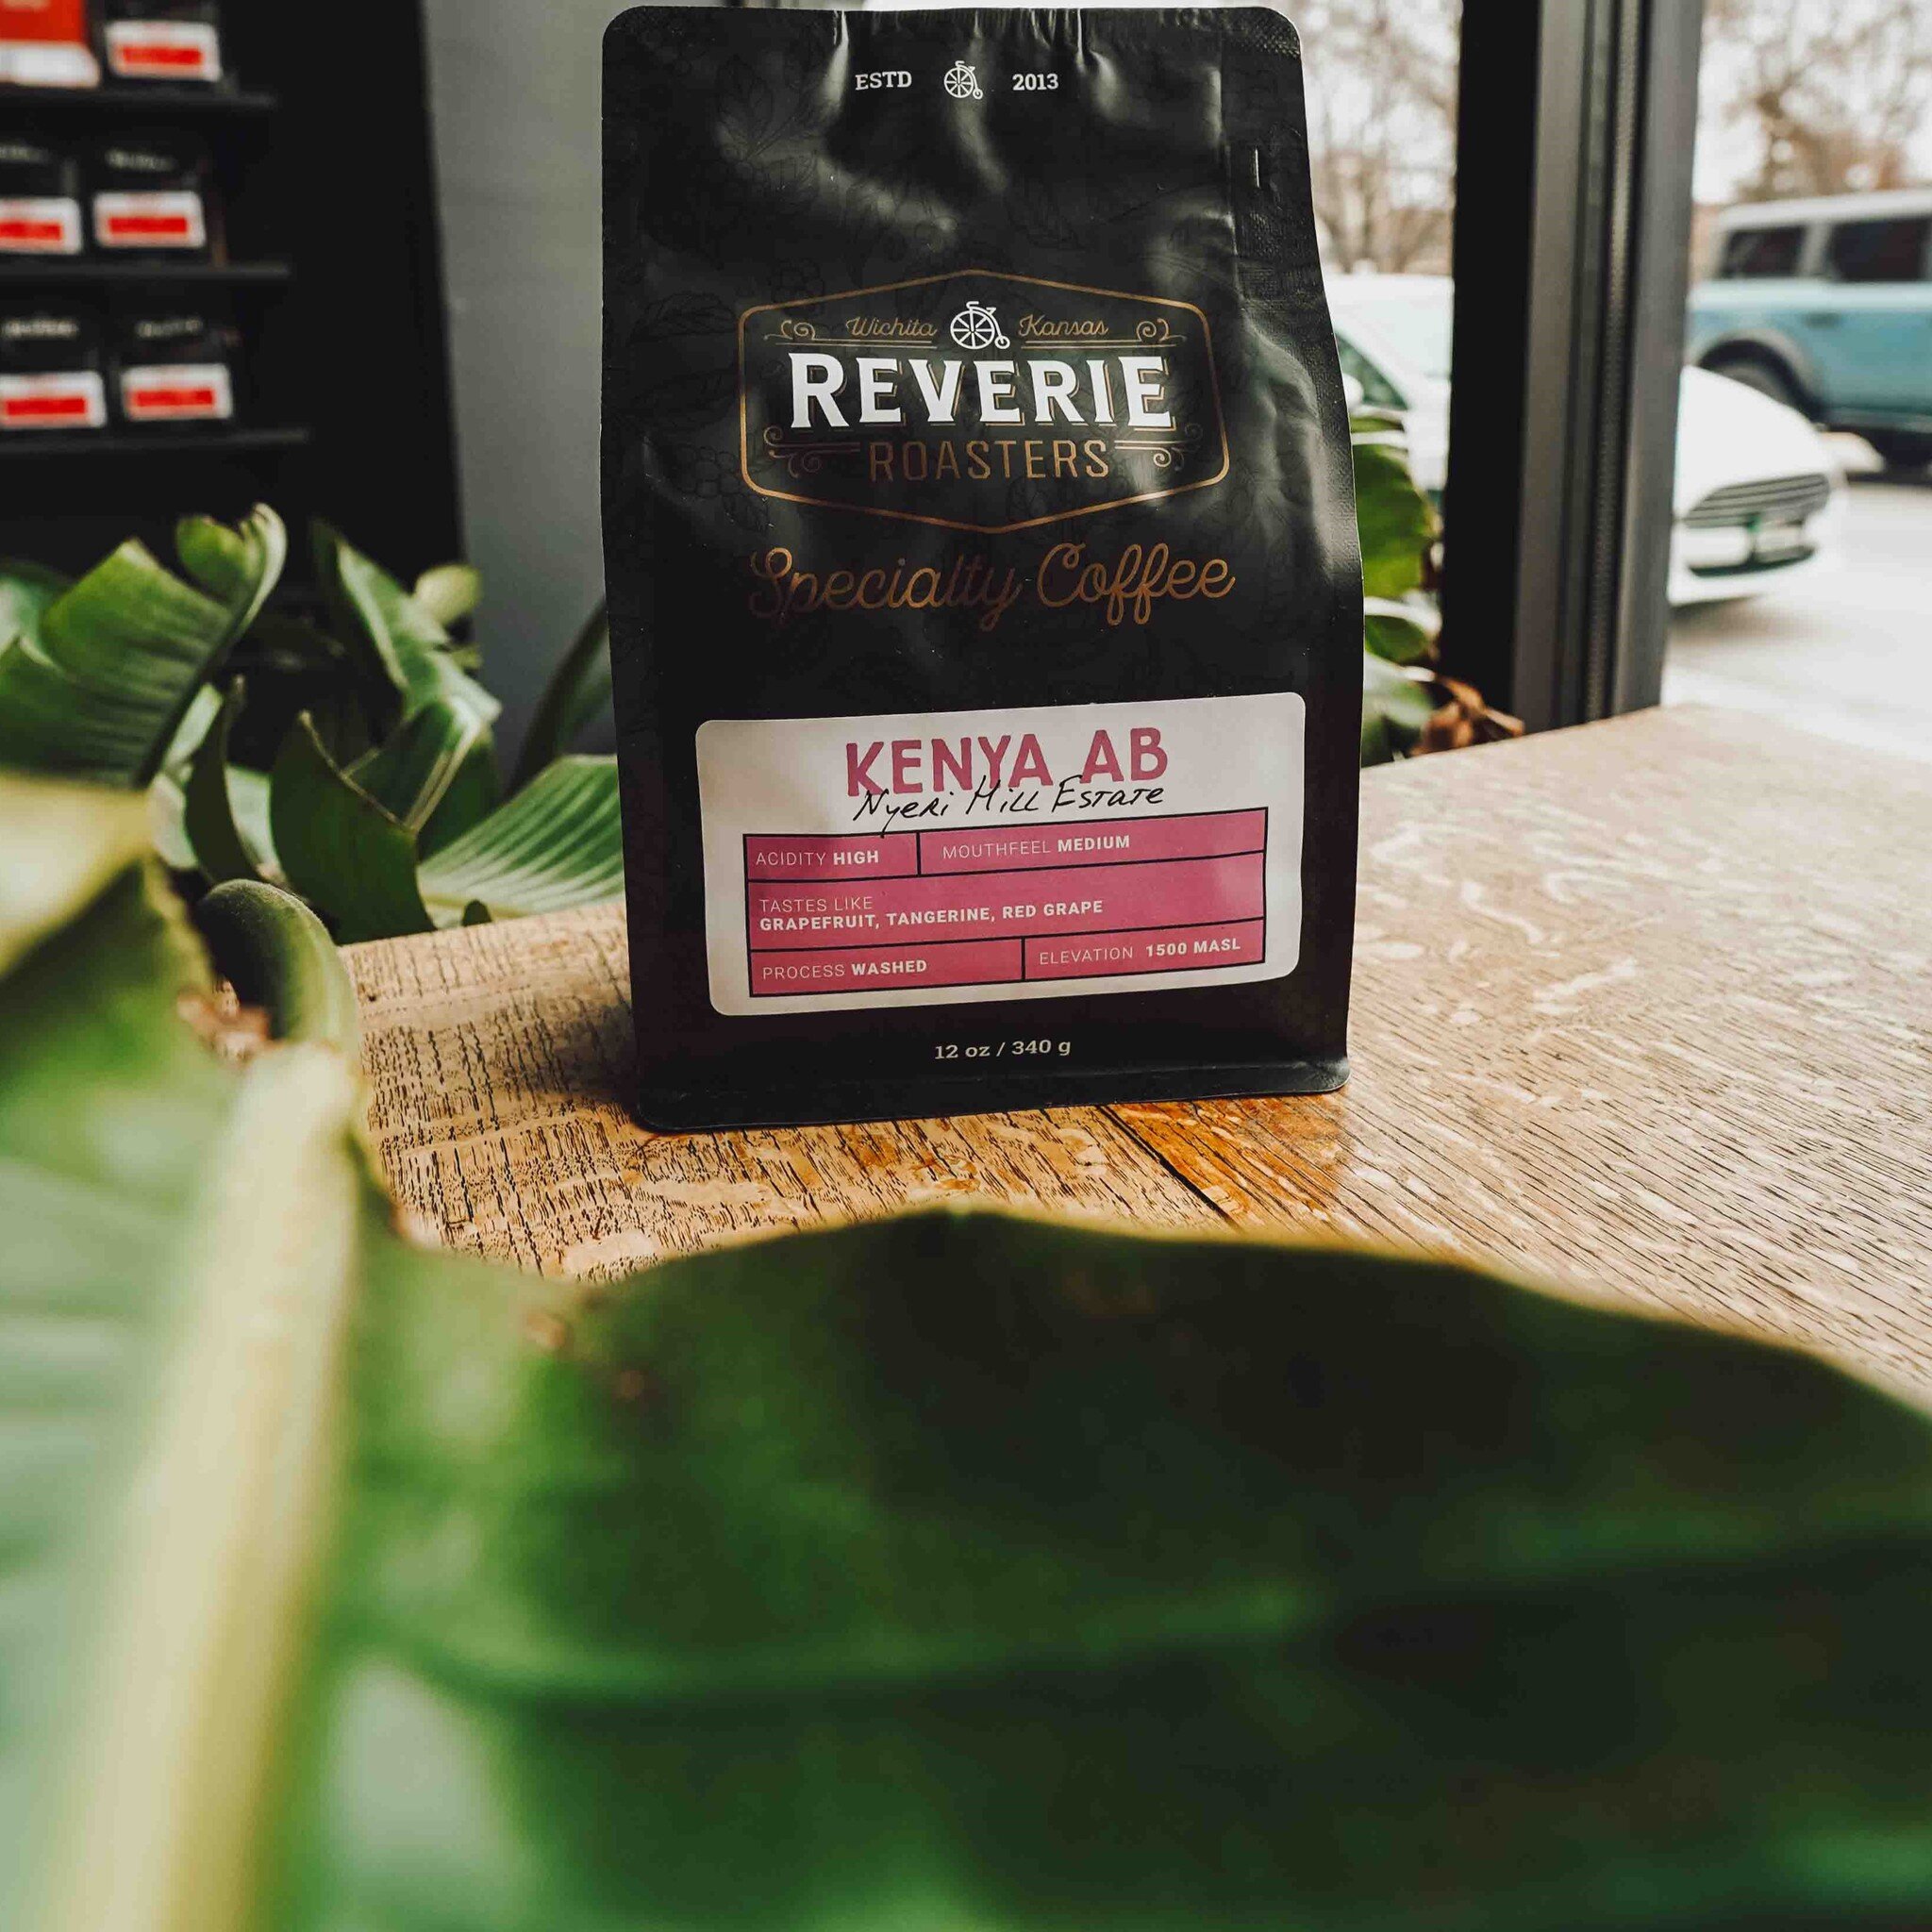 Have you tried the latest Kenya to grace our shelves from the Nyeri Hill Estate?

This medium bodied, high acidity thriller delights with zippy notes of grapefruit, tangerine, and red grape. Not a hint of tomato present in this washed process wonder.